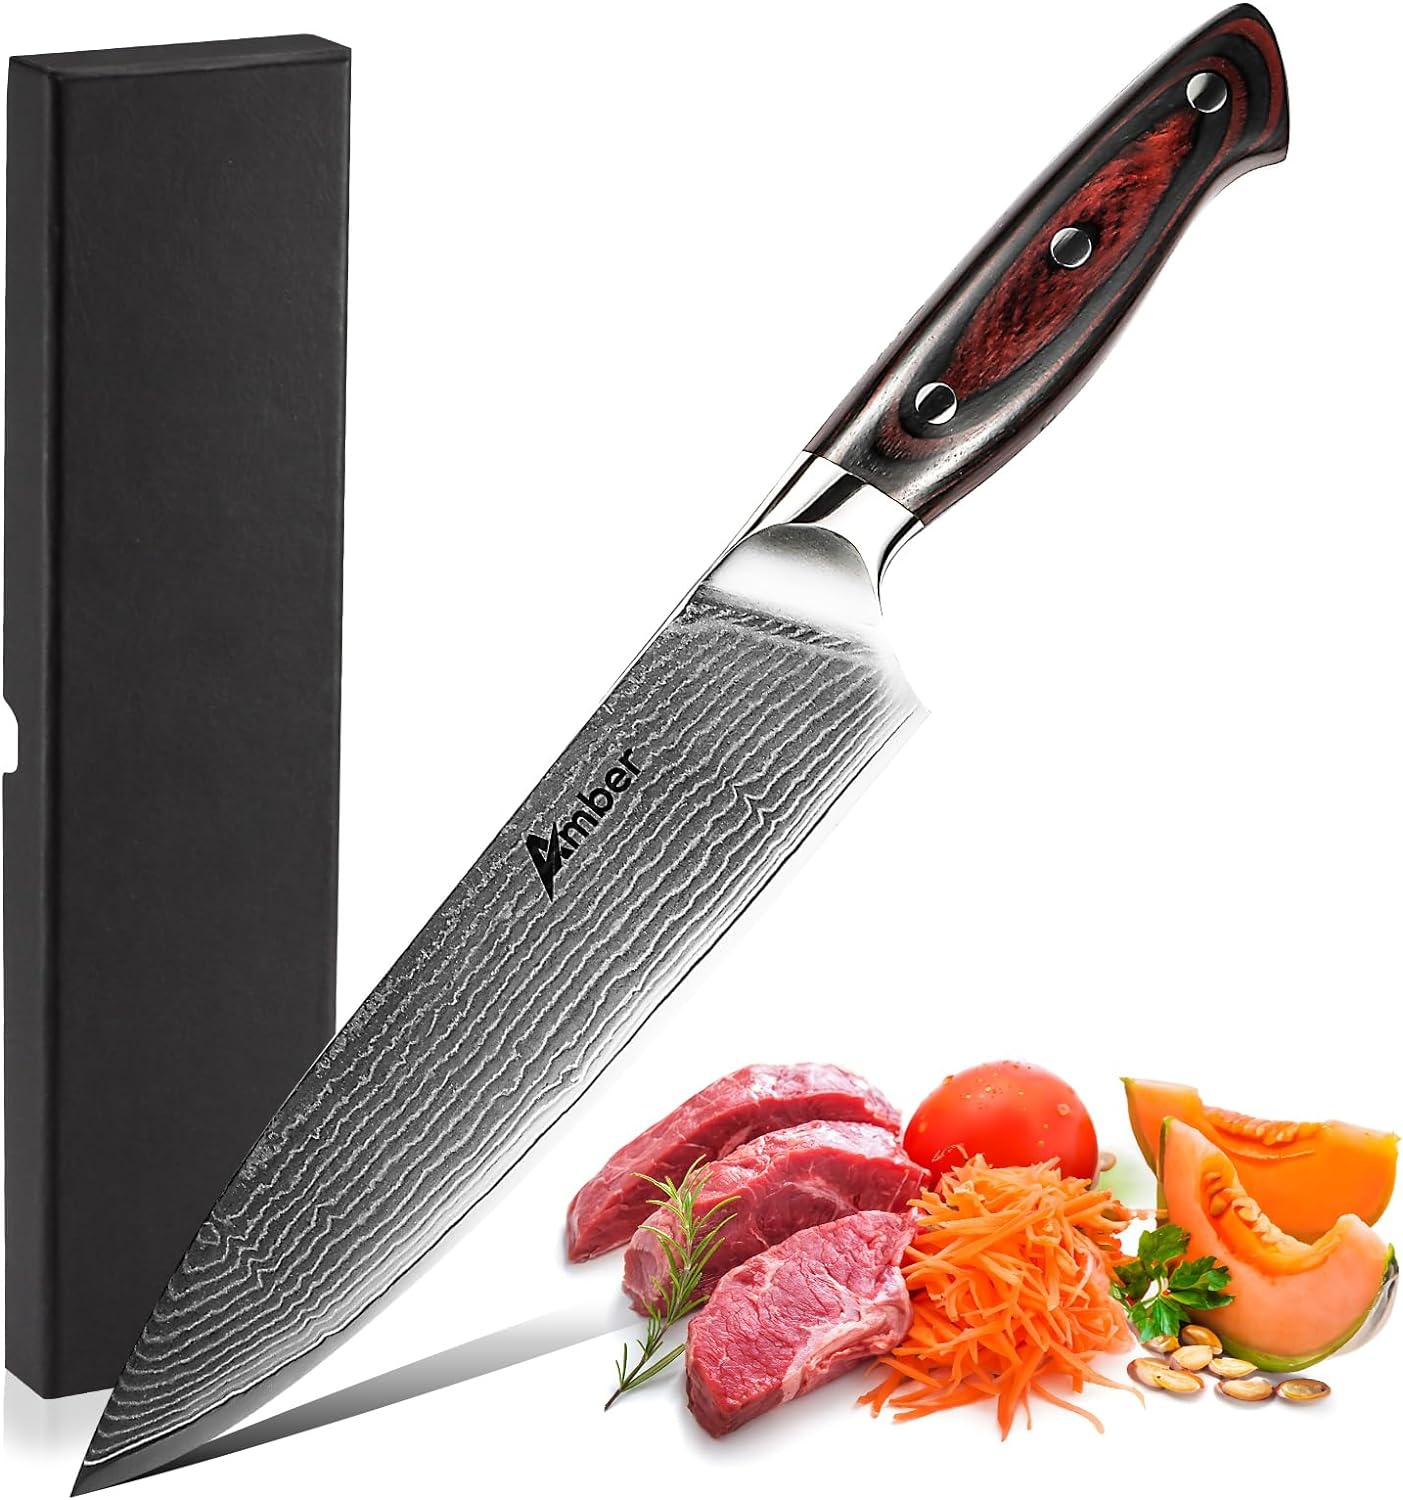 KD Japanese VG-10 Damascus Chef Knife: Ideal Kitchen Tool